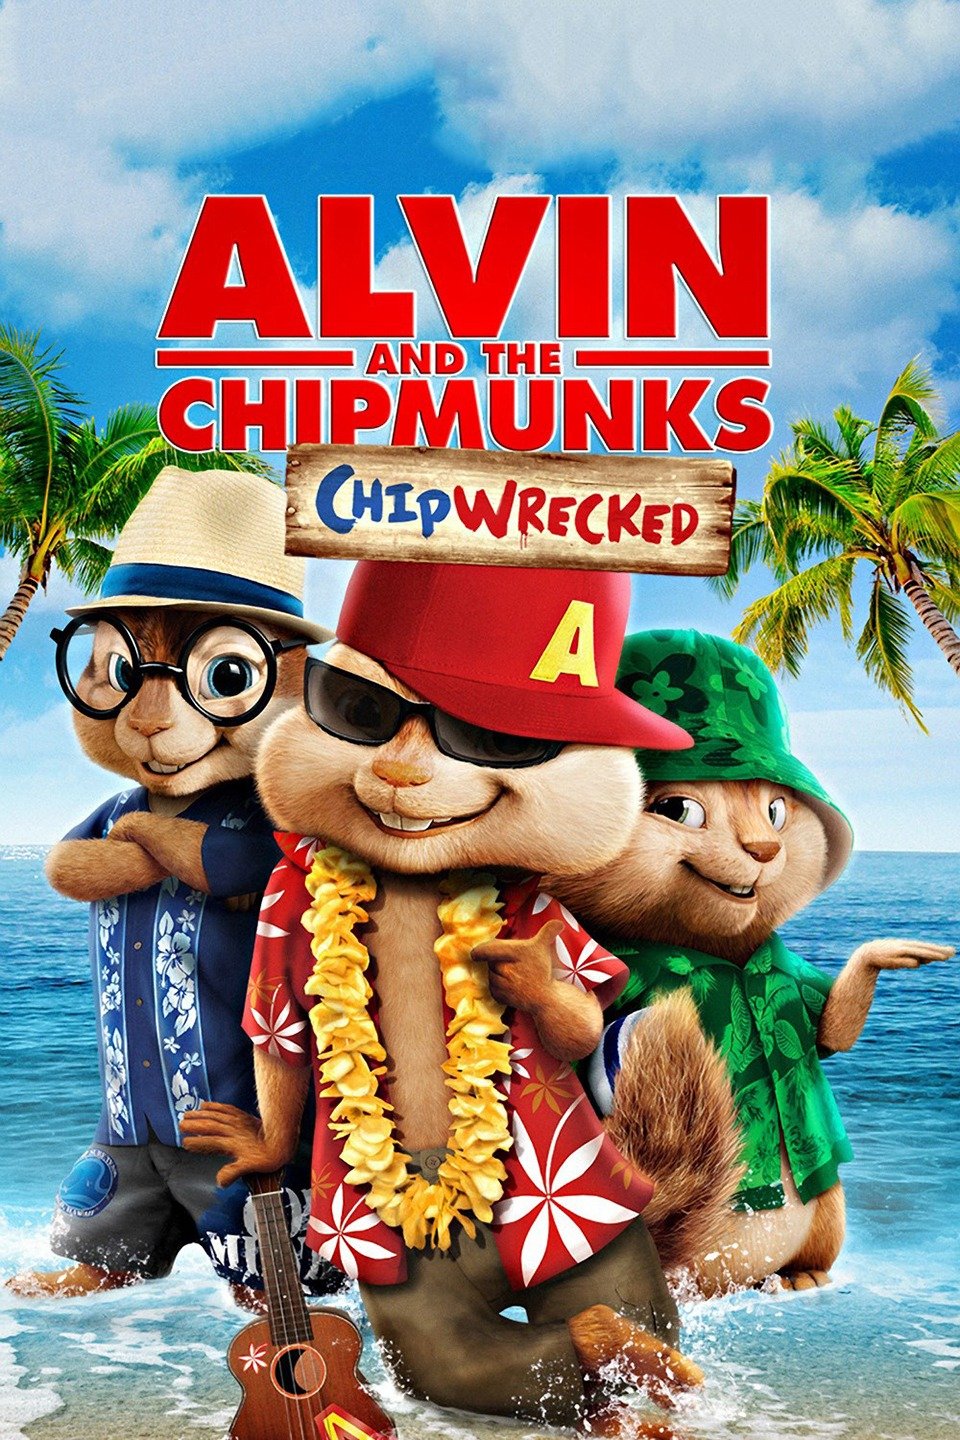 Alvin And The Chipmunks Movie Poster (27 X 40) Item MOVEI5305 ...